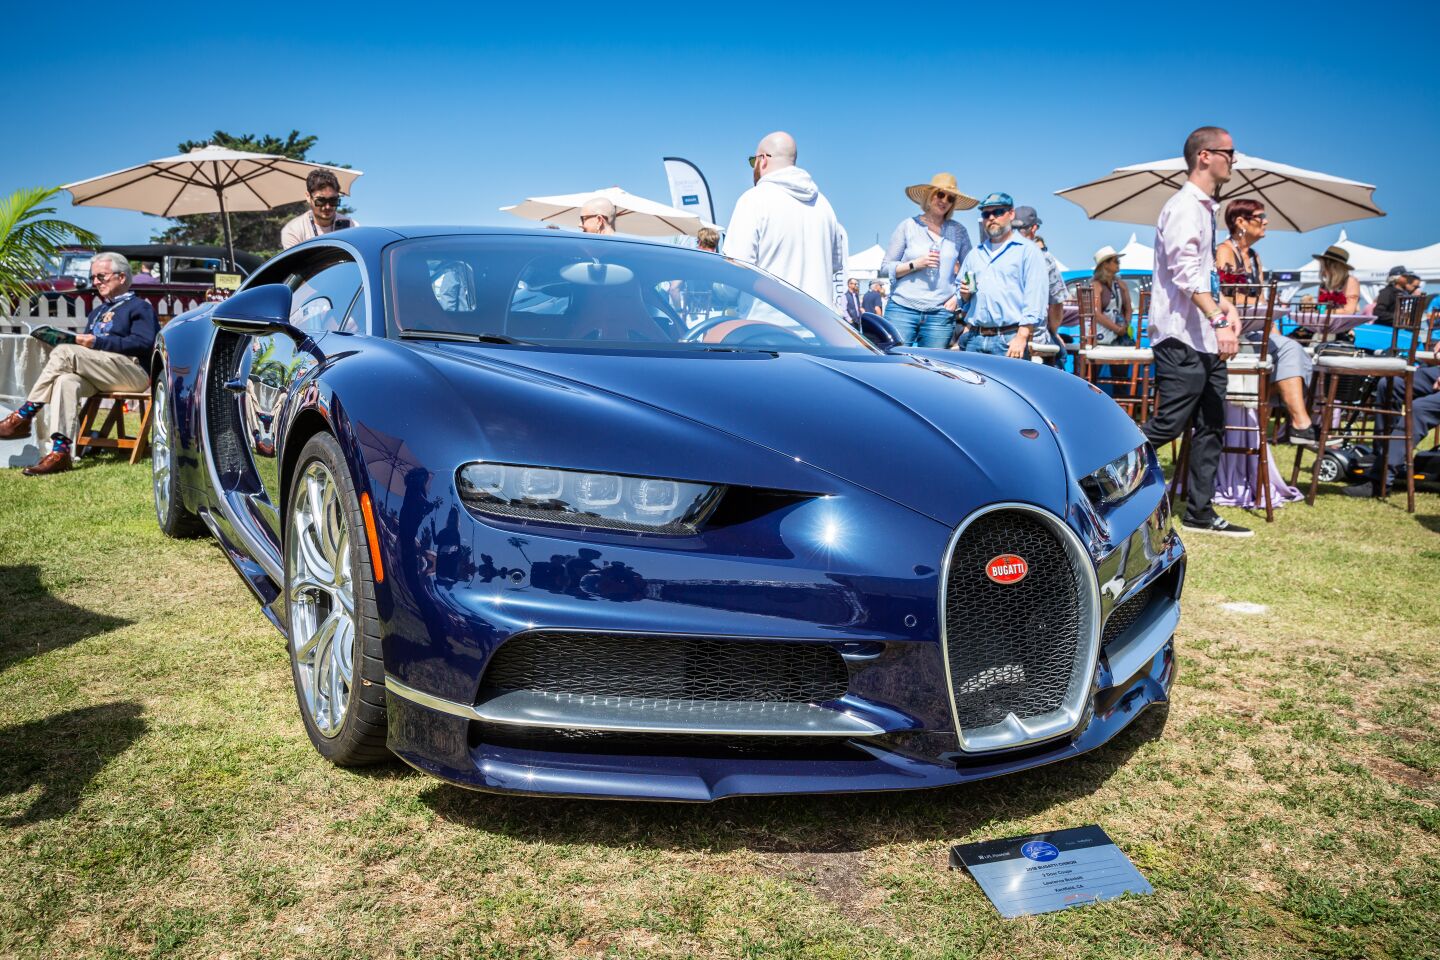 This 2018 Bugatti Chiron is owned by Lawrence Brackett of Kentfield in Marin County.